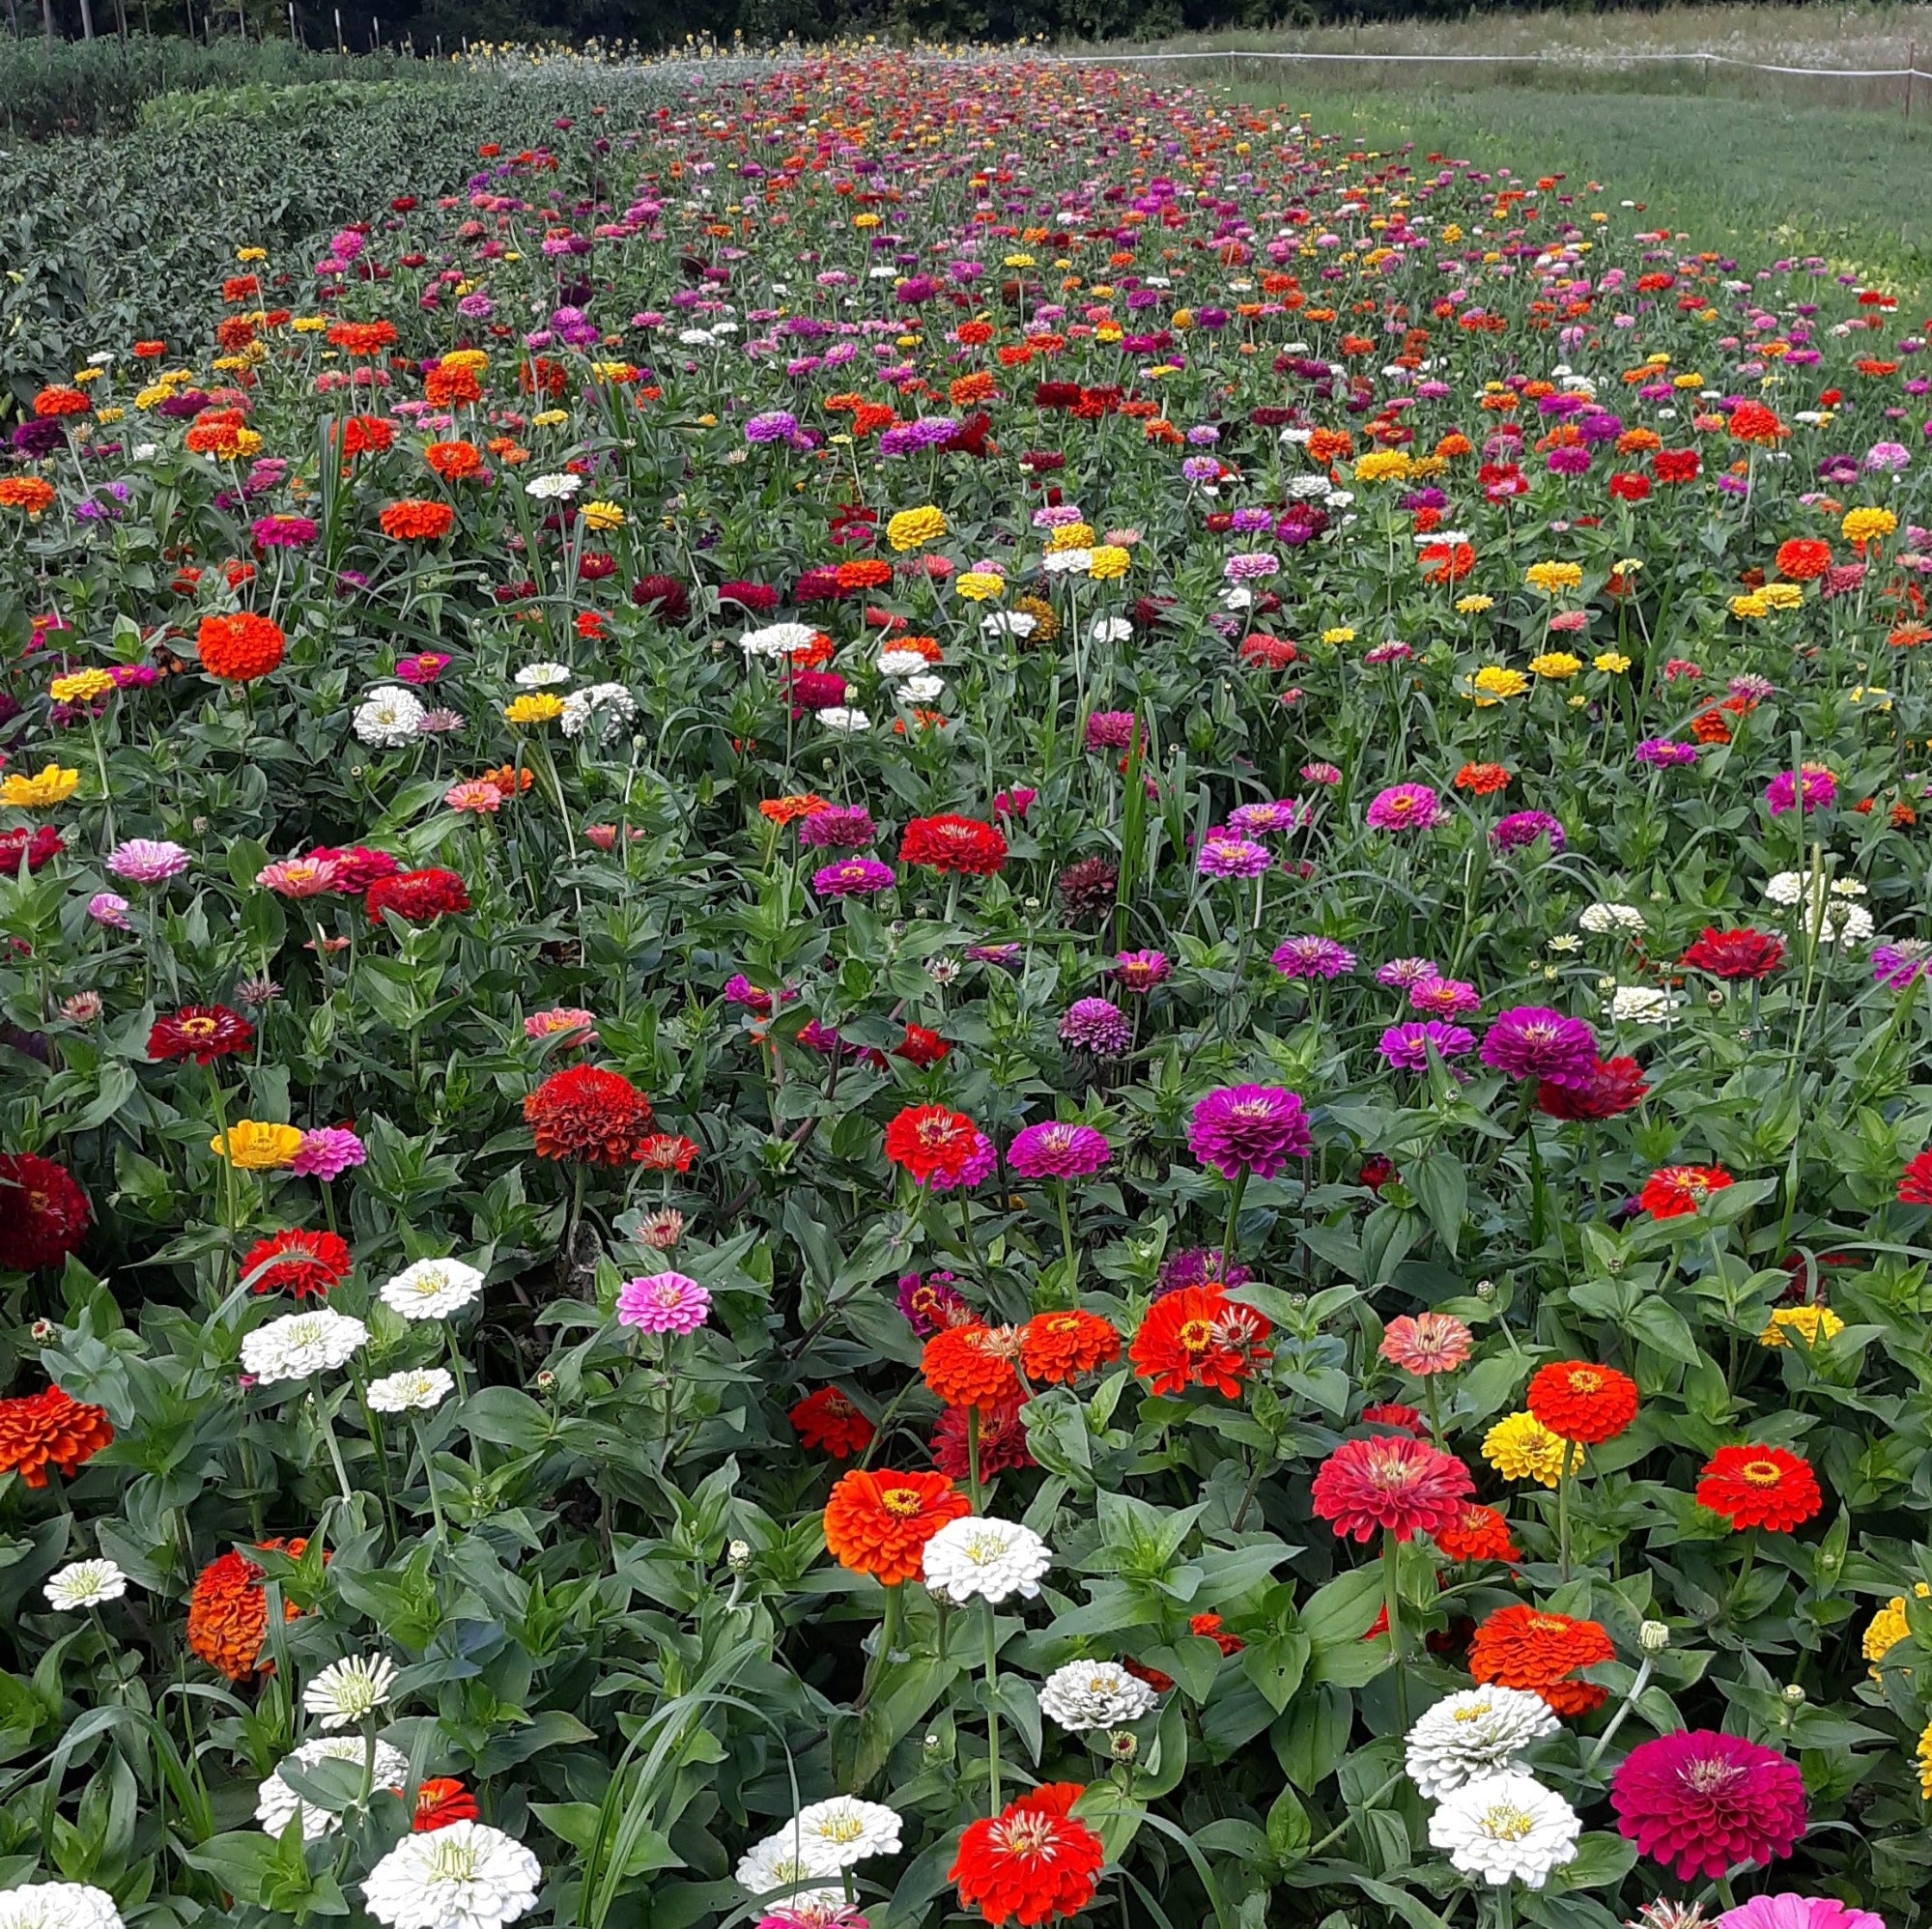 A field of Mississippi Blend Zinnia blooms with purple, white, red, pink, yellow, and coral flower colors